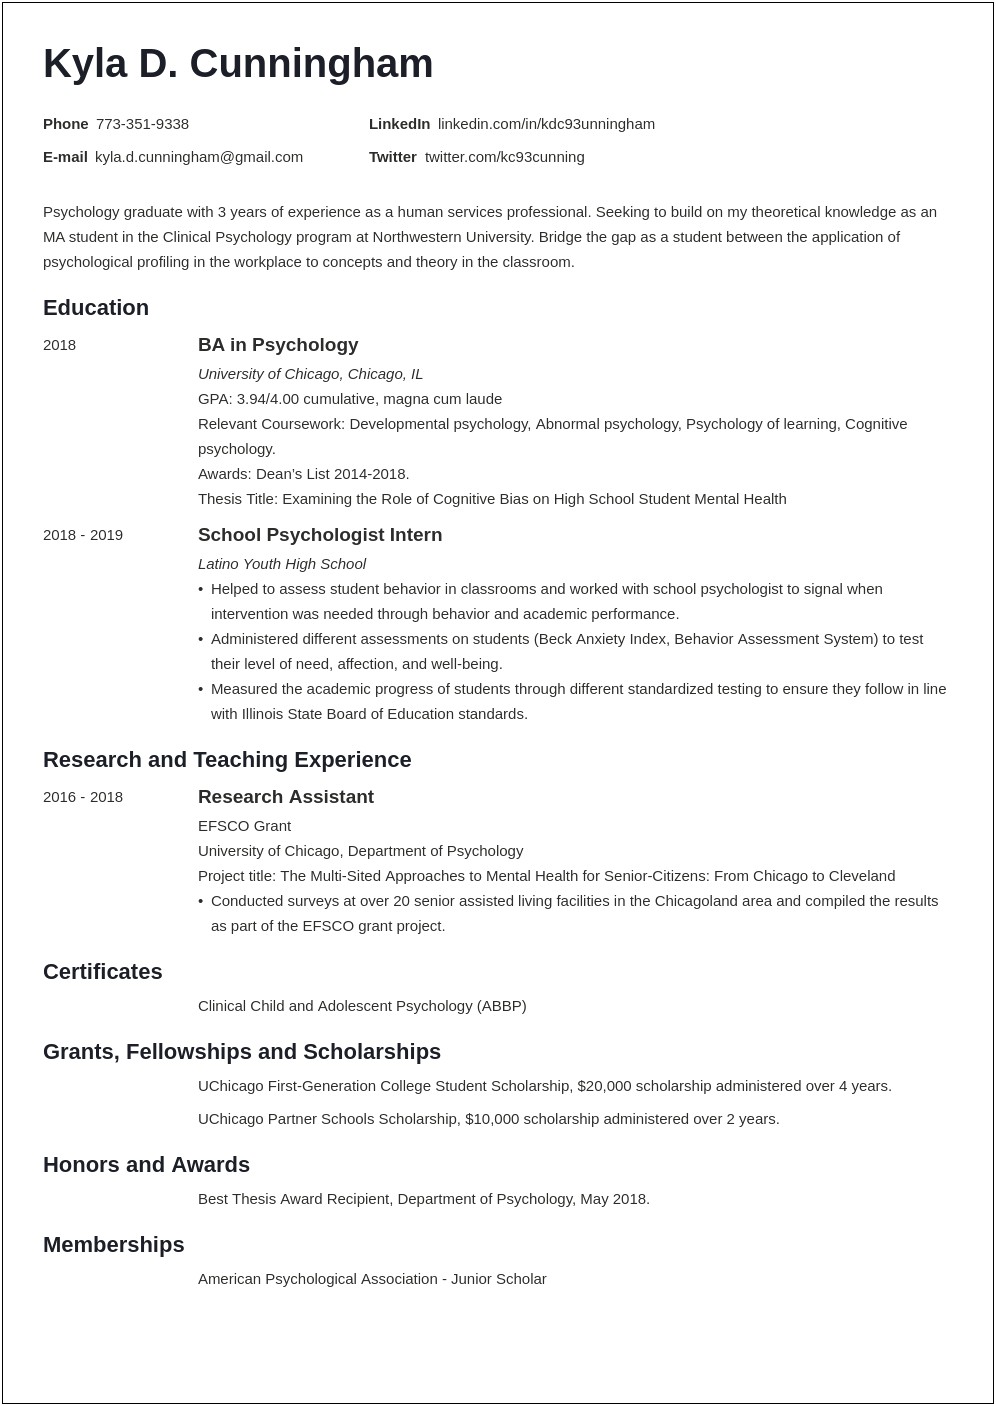 Resume Objectives For Graduate Students